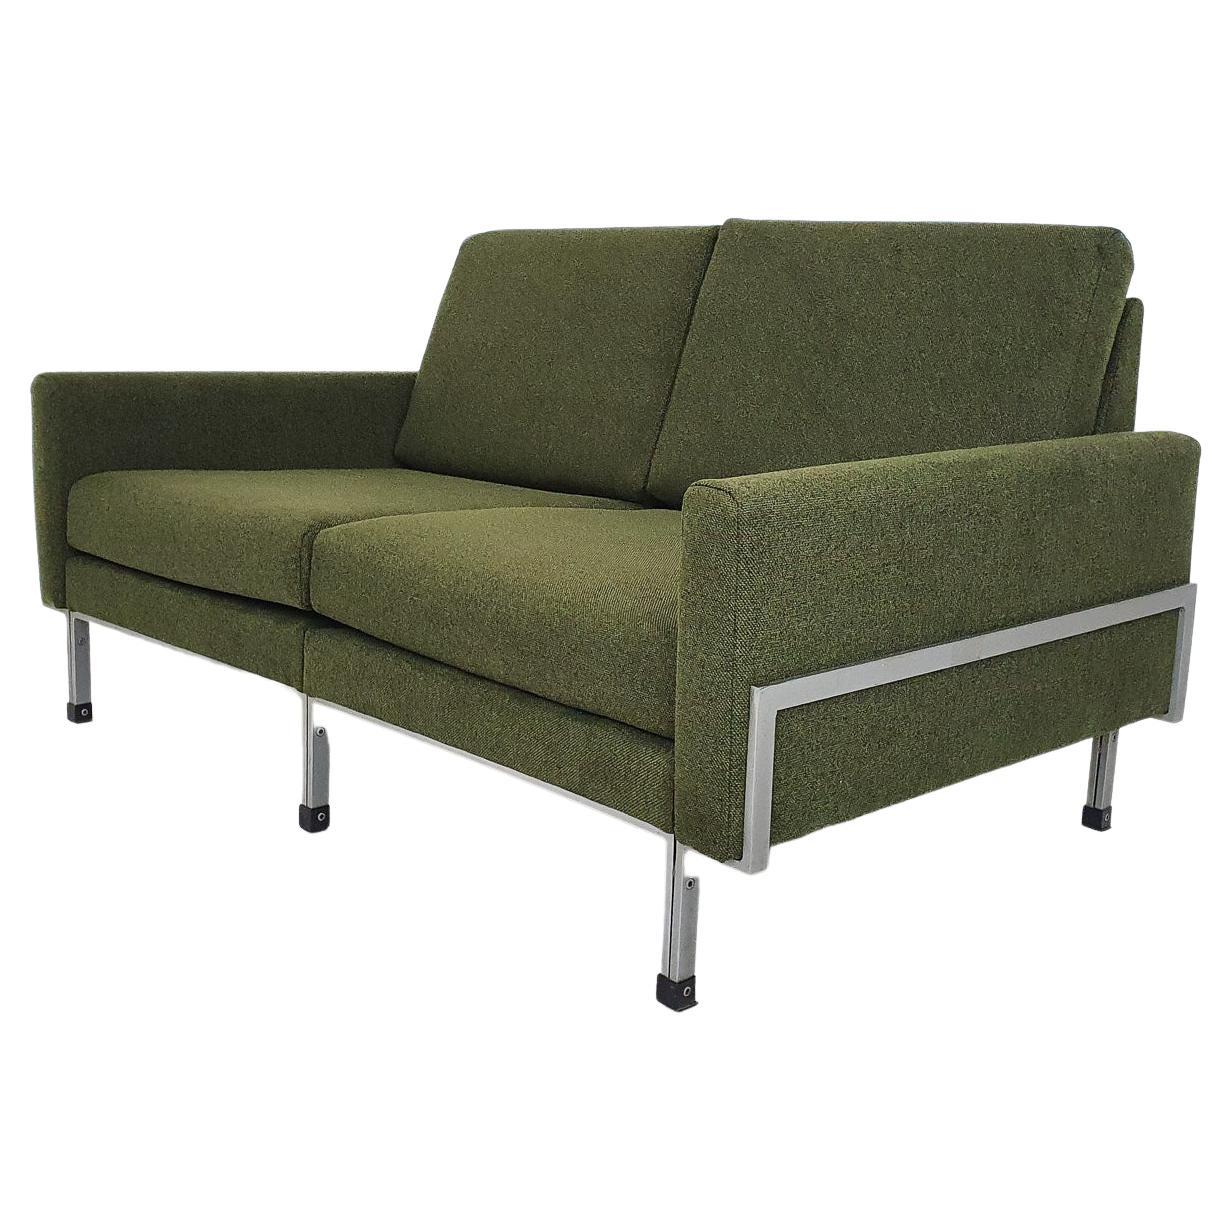 Mid-Century Two-Seater, Attrb. to Florence Knoll, 1950's